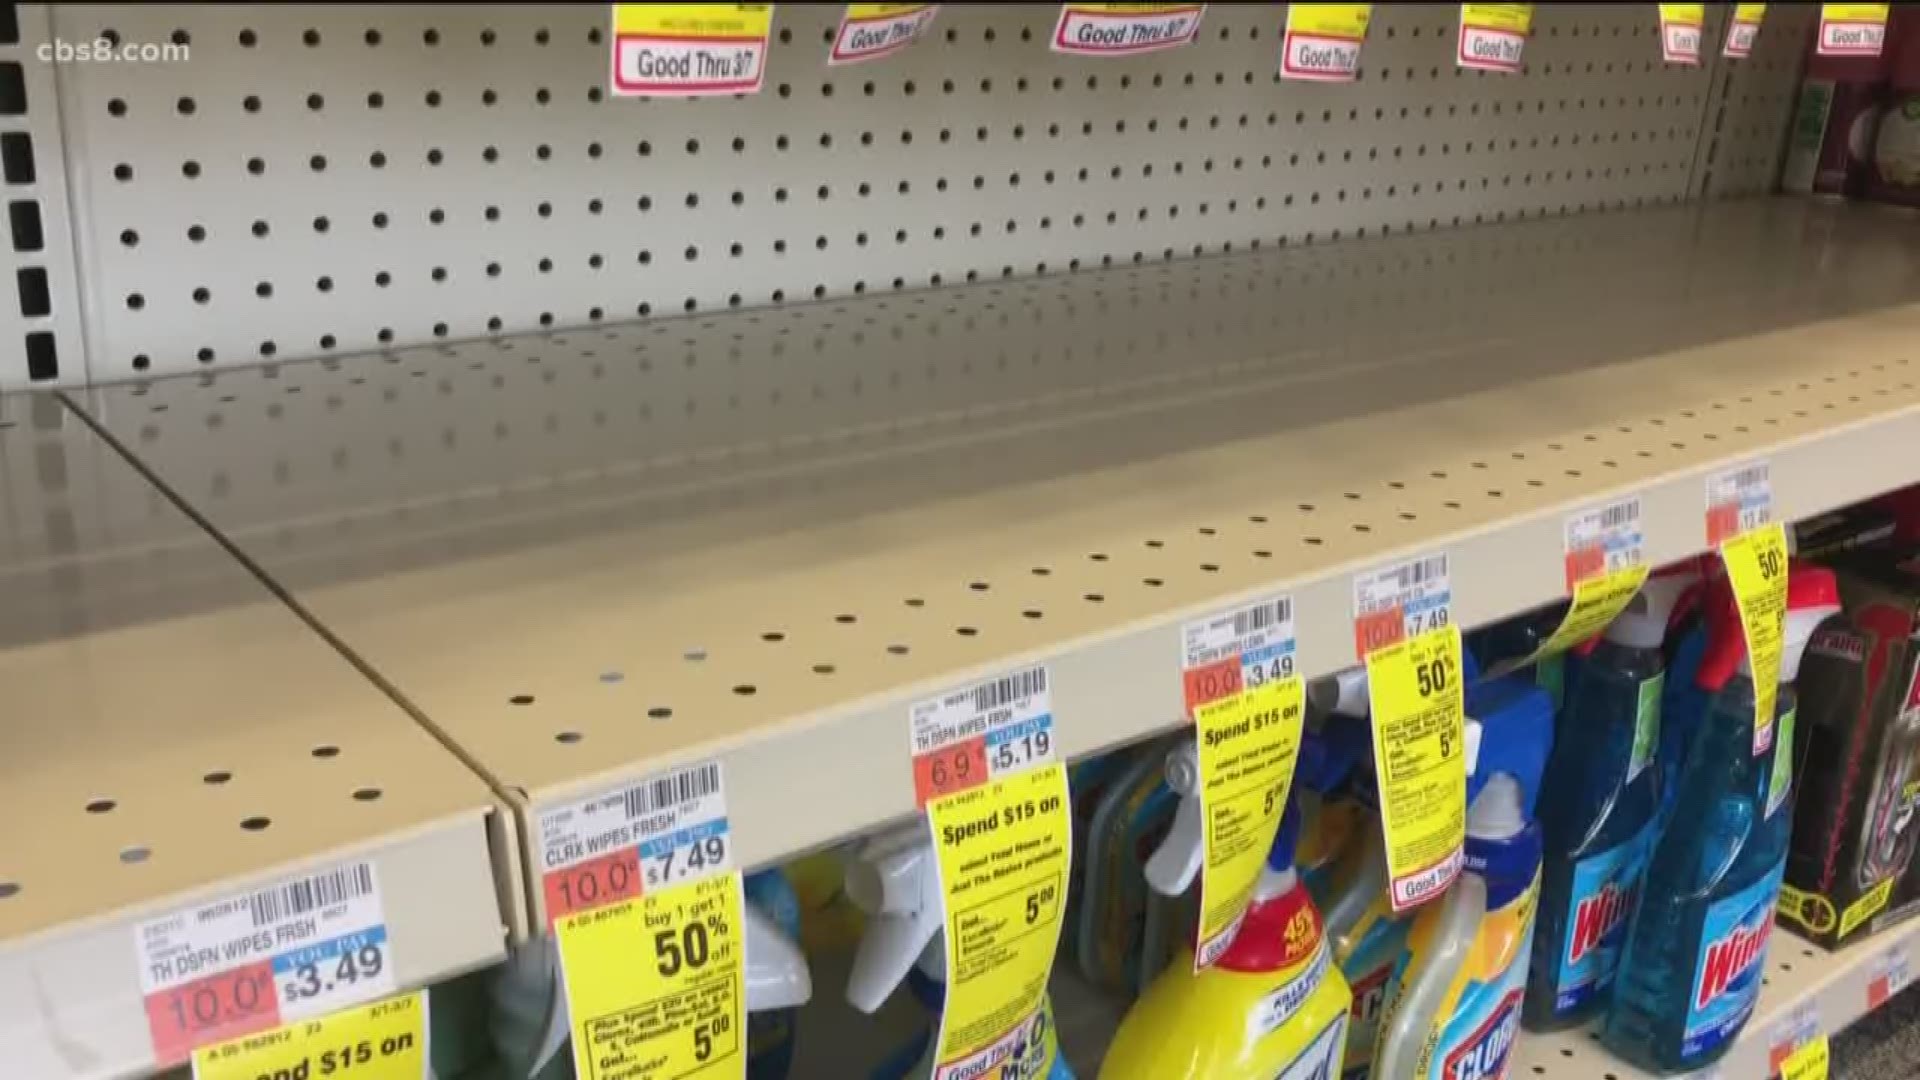 The City Attorney's Office warned San Diegans Friday of price gouging amid global worries about the spread of the novel coronavirus.